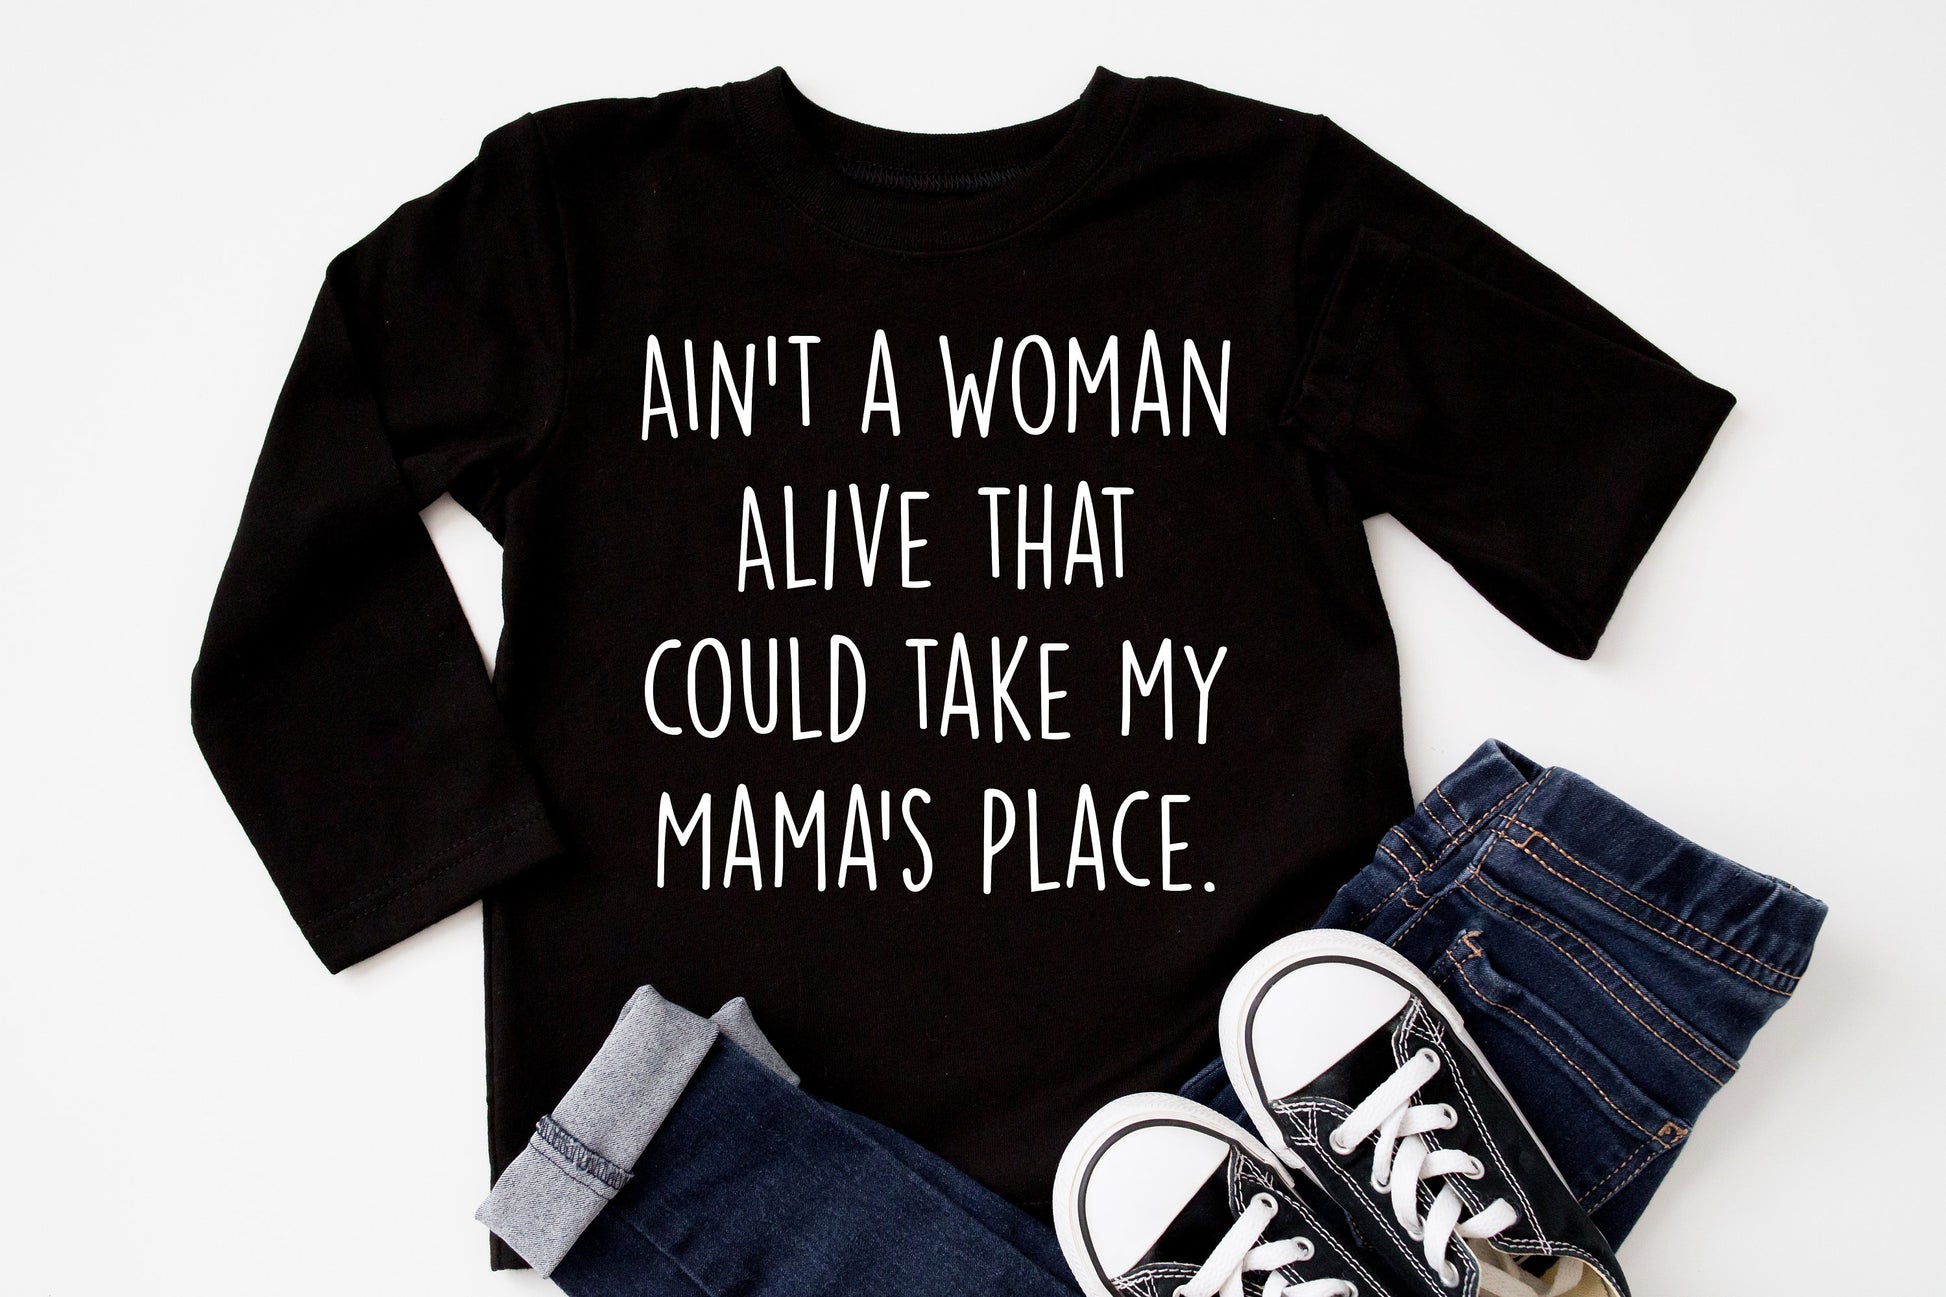 Ain't a Woman Alive that could Take My Mama's Place Infant or Toddler Shirt or Bodysuit - Cute Toddler Shirt - mama's boy shirt - rap shirt